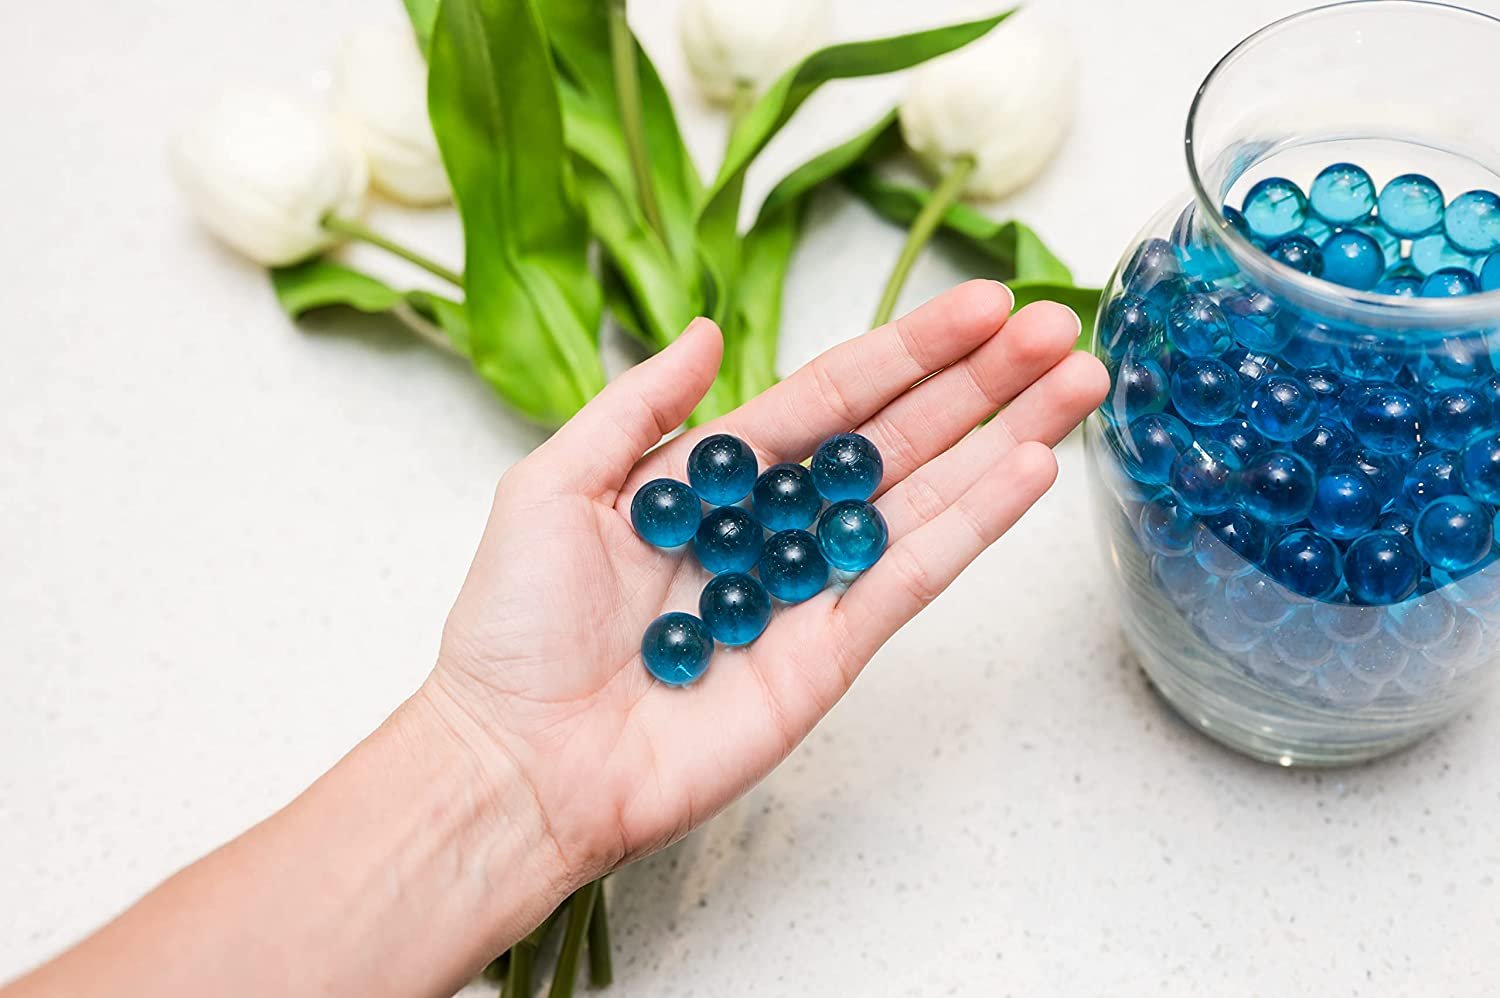 Galashield Blue Marbles for Vases Glass Marbles Bulk Vase Fillers Glass Beads for Vases, Round Marble 1lb, Approx. 80 Pcs, Size: 1 lbs